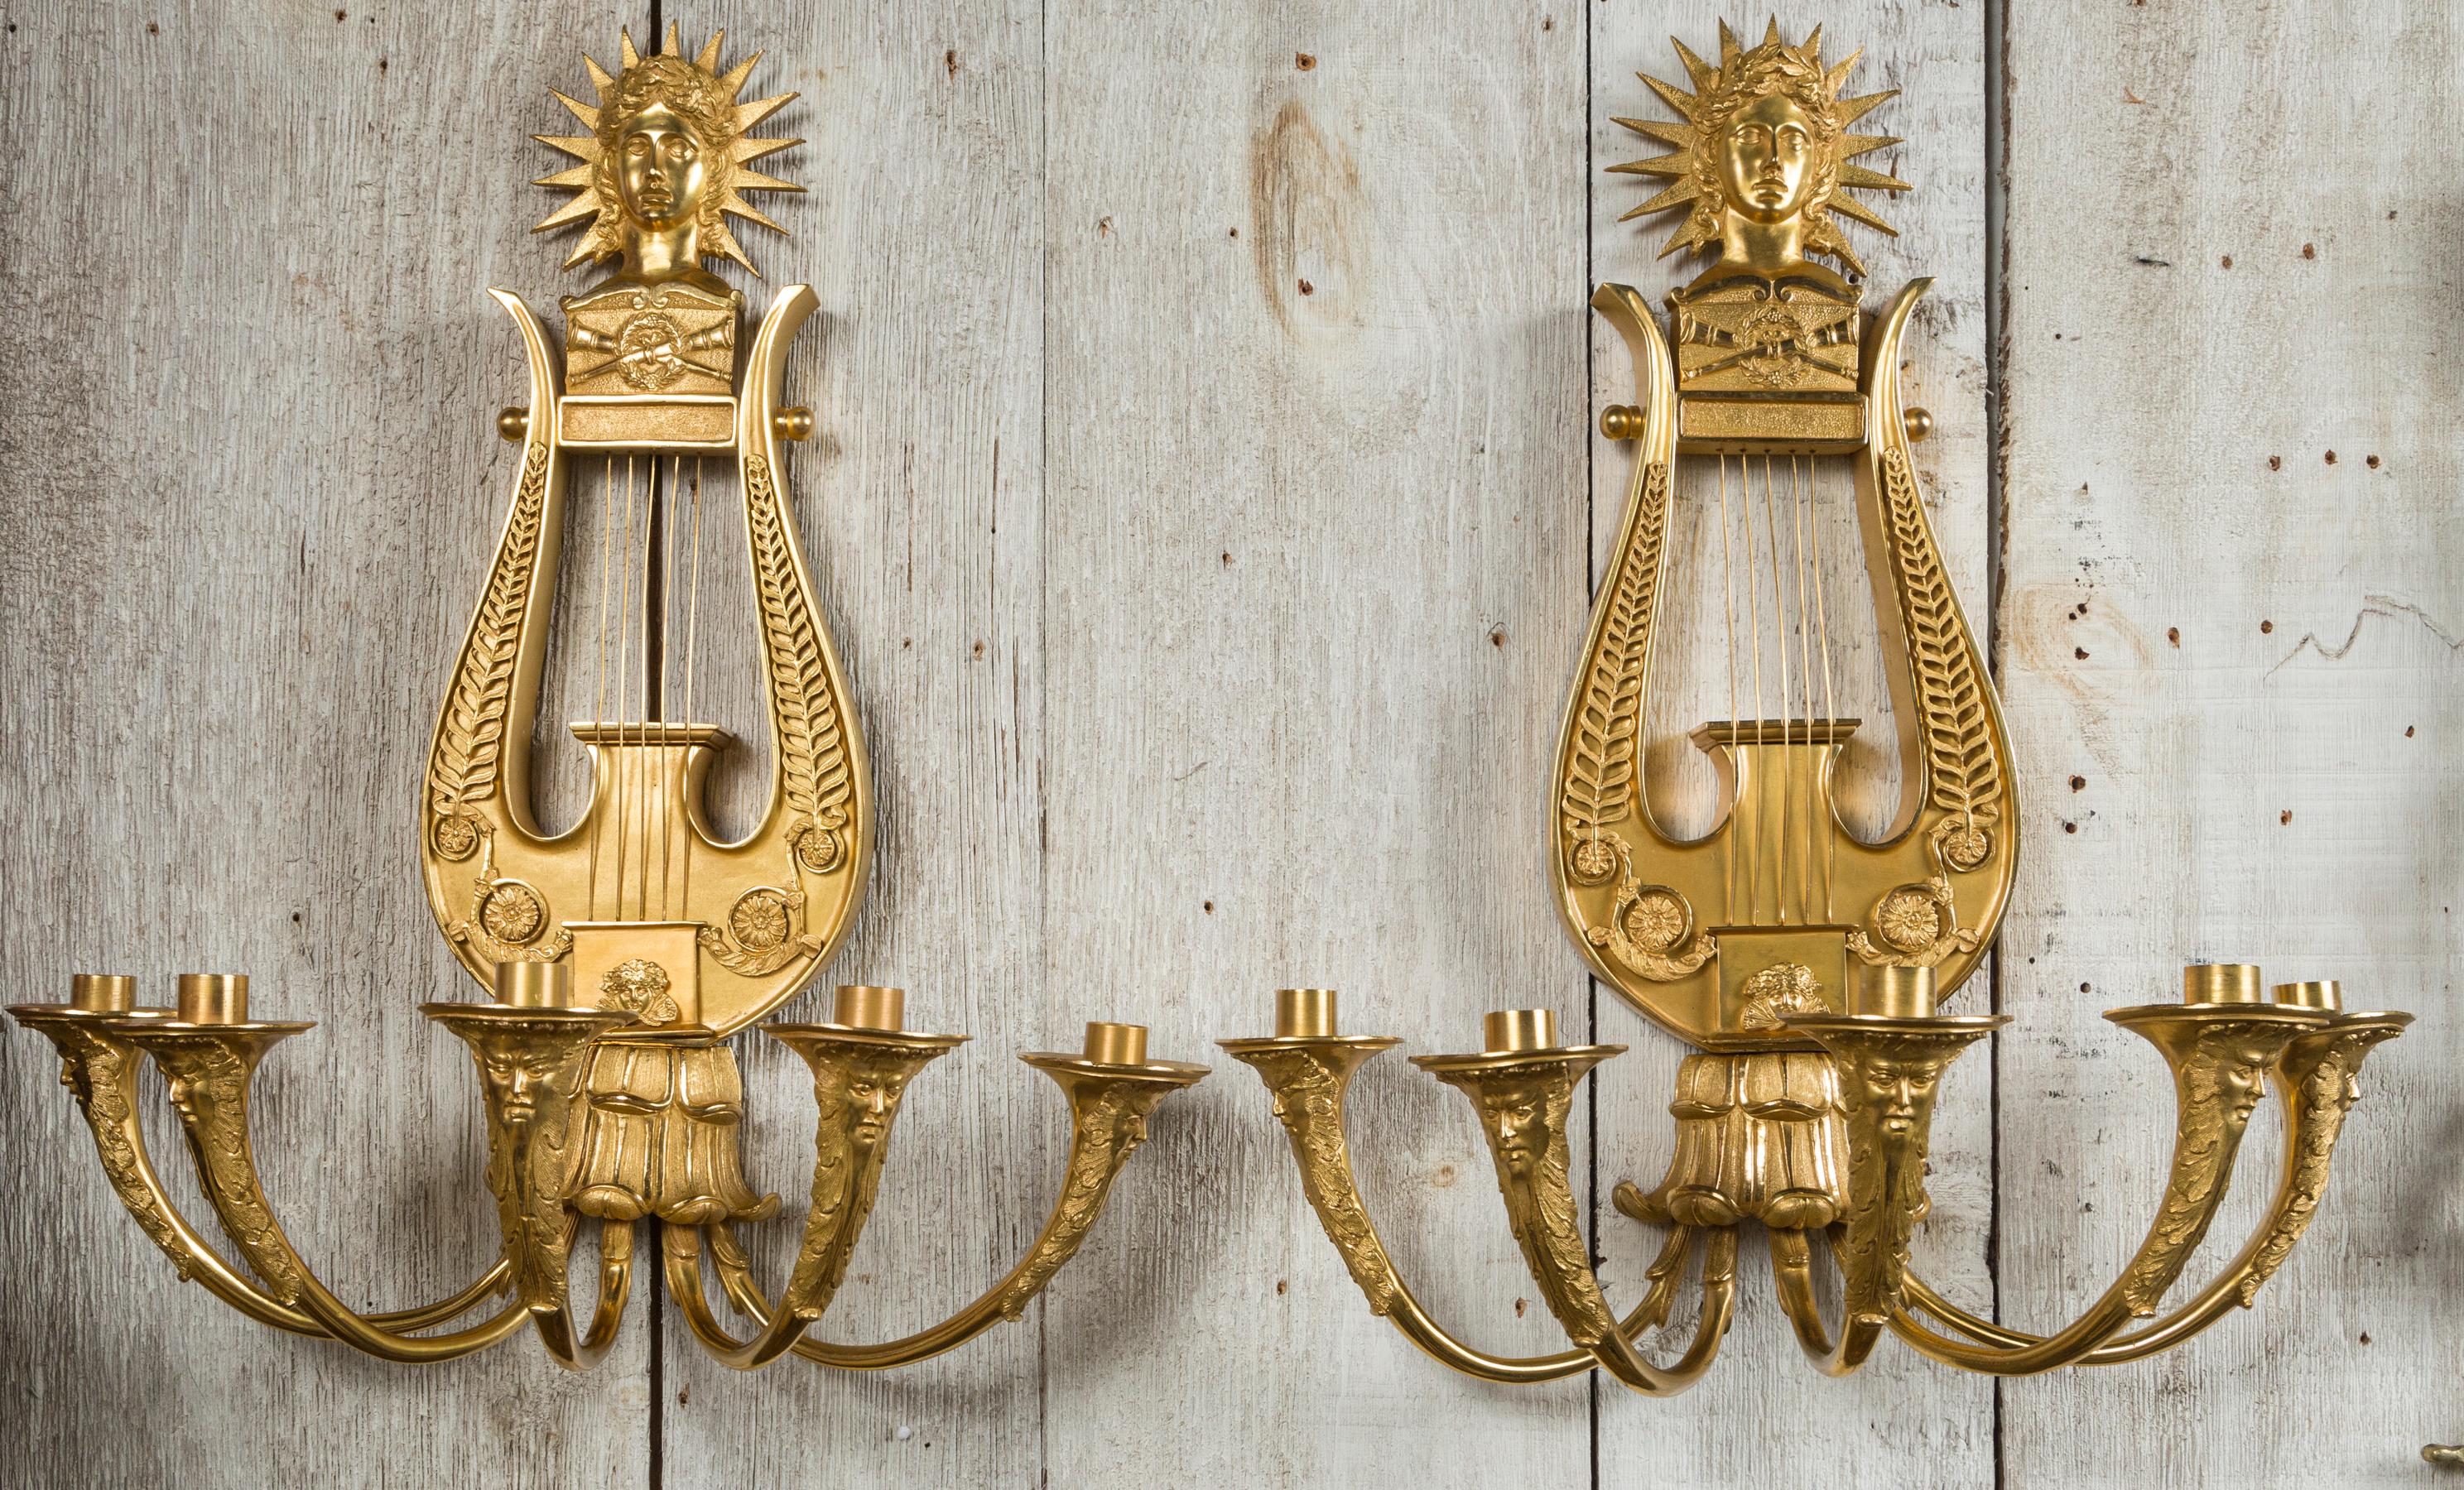 Dating from the early part of the 19th century, they have been regilded. Best quality of casting, carving and chasing. Excellent regilding by a New York company.
Five candle arms, with faces carved and chased. Lyre form above, with their strings.